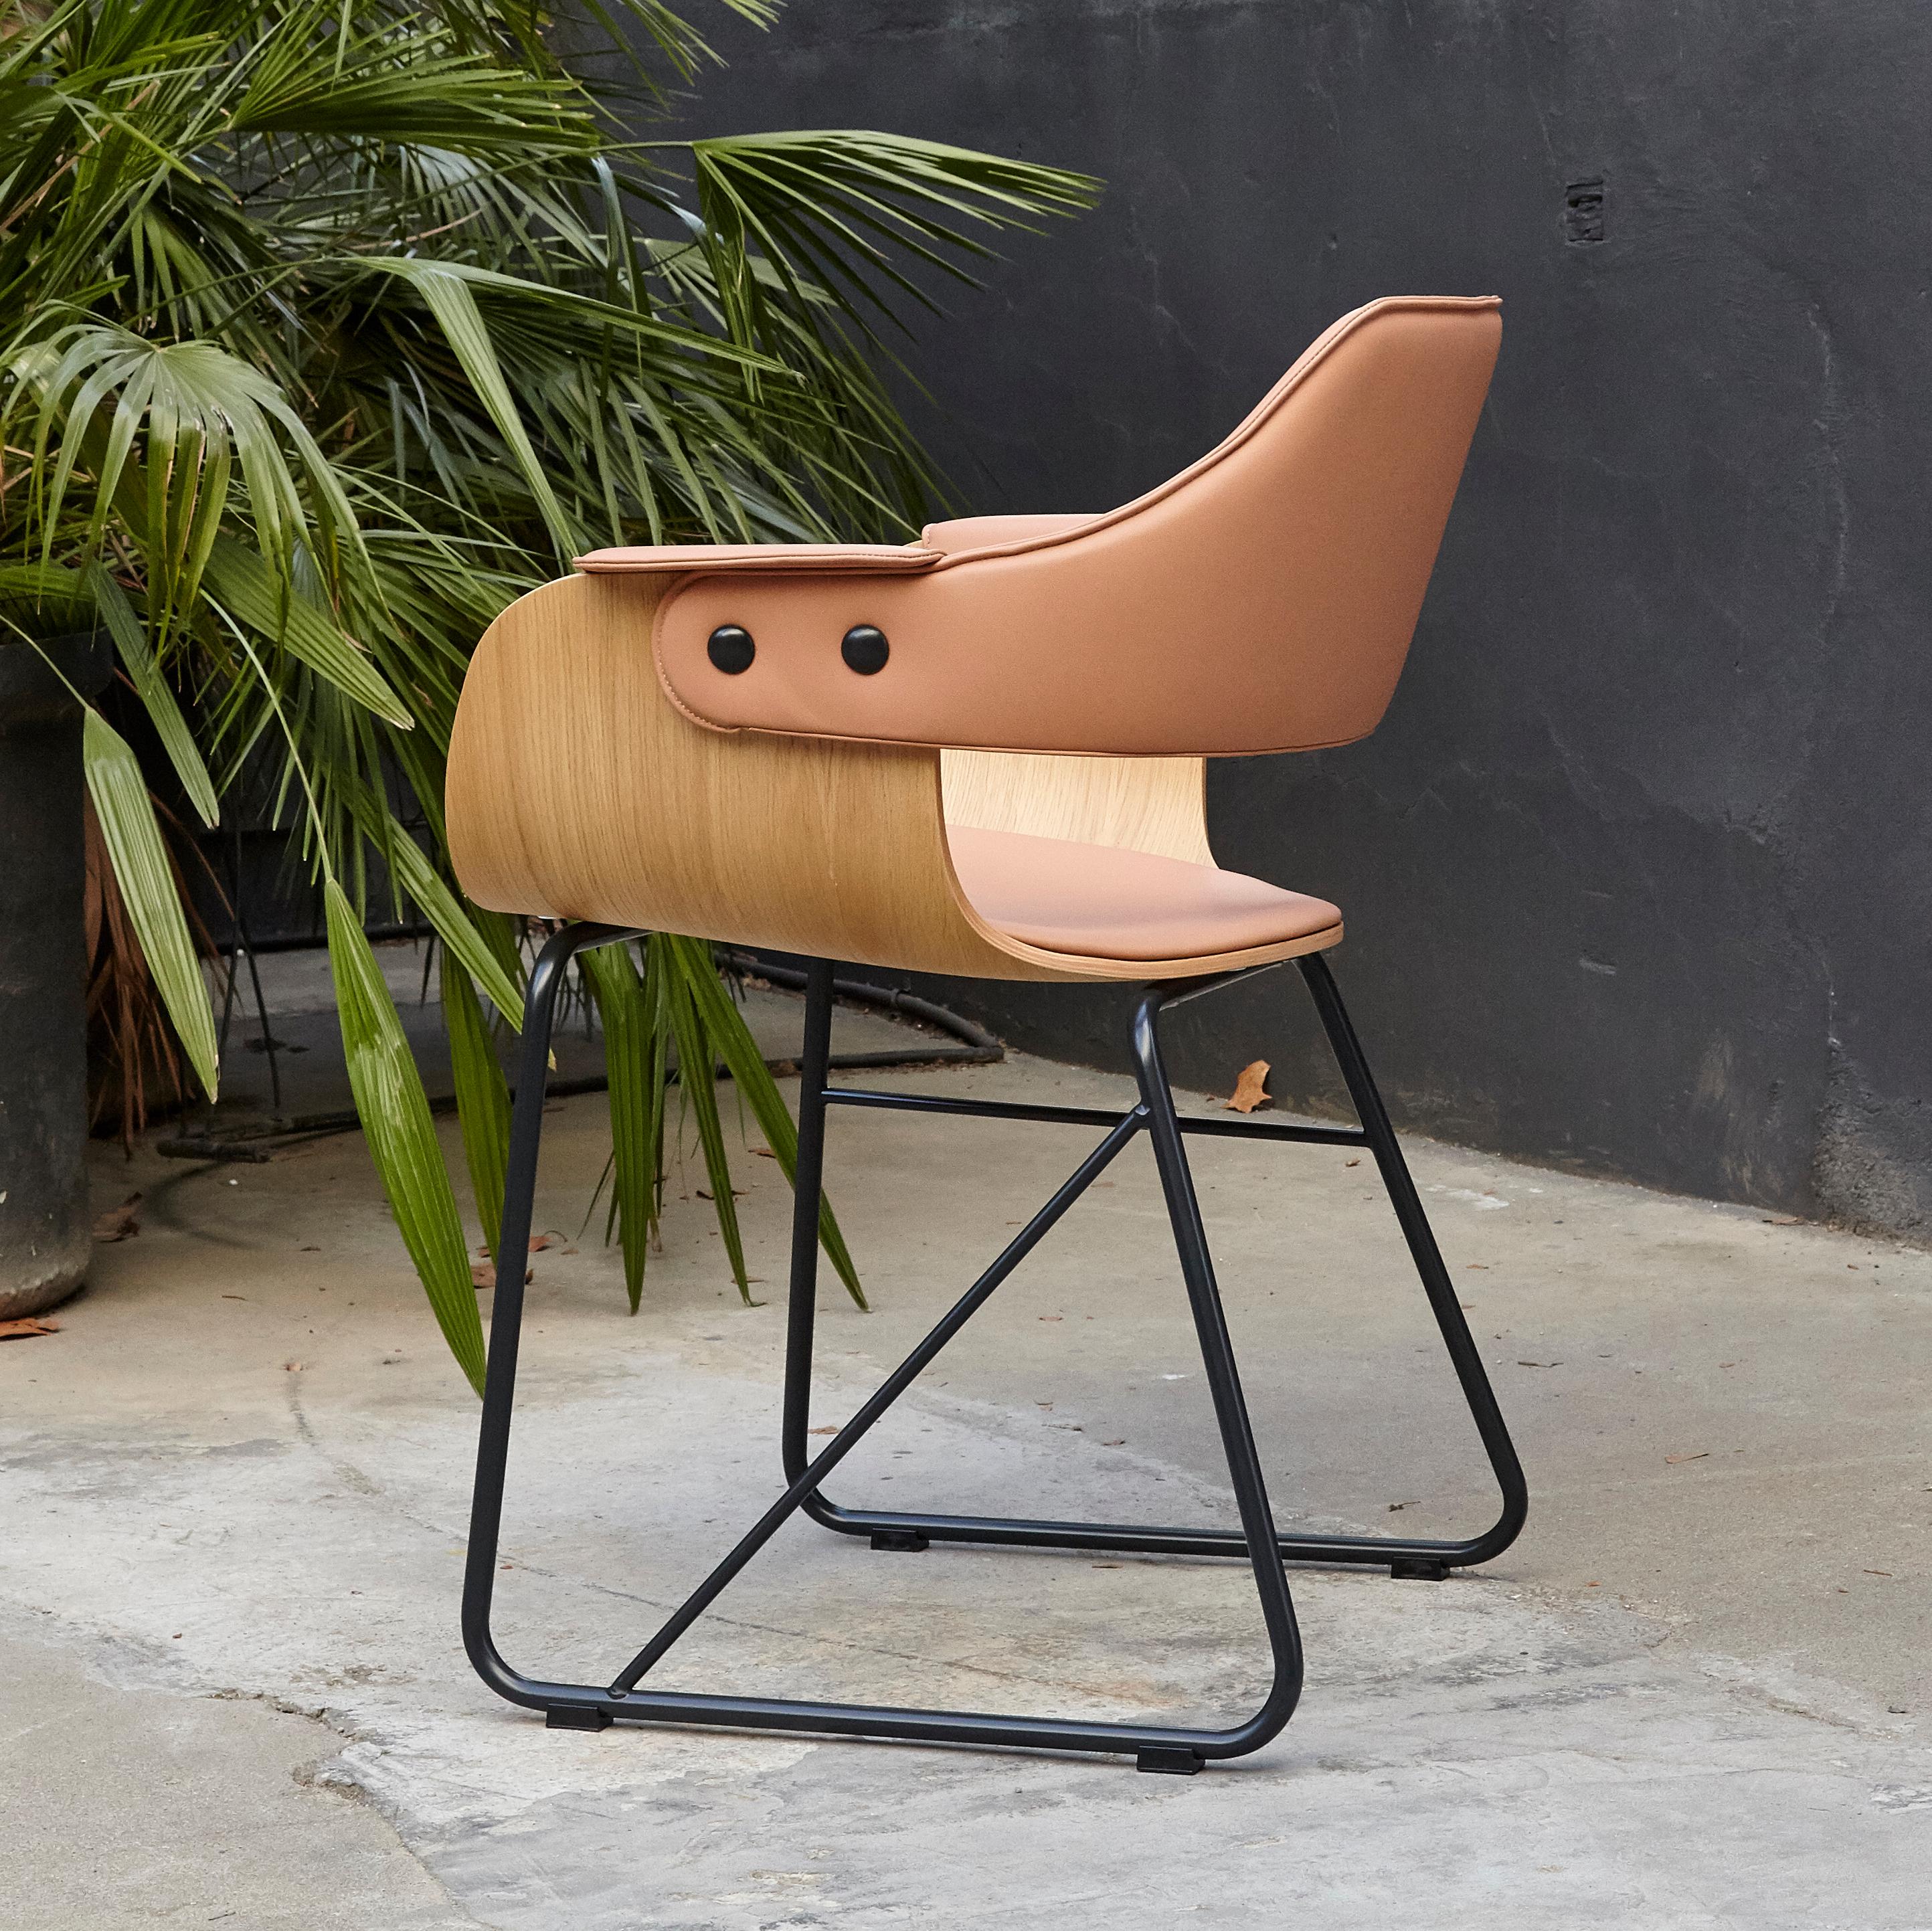 Steel Jaime Hayon Contemporary Leather Upholstered Wood Chair Showtime by BD Barcelona